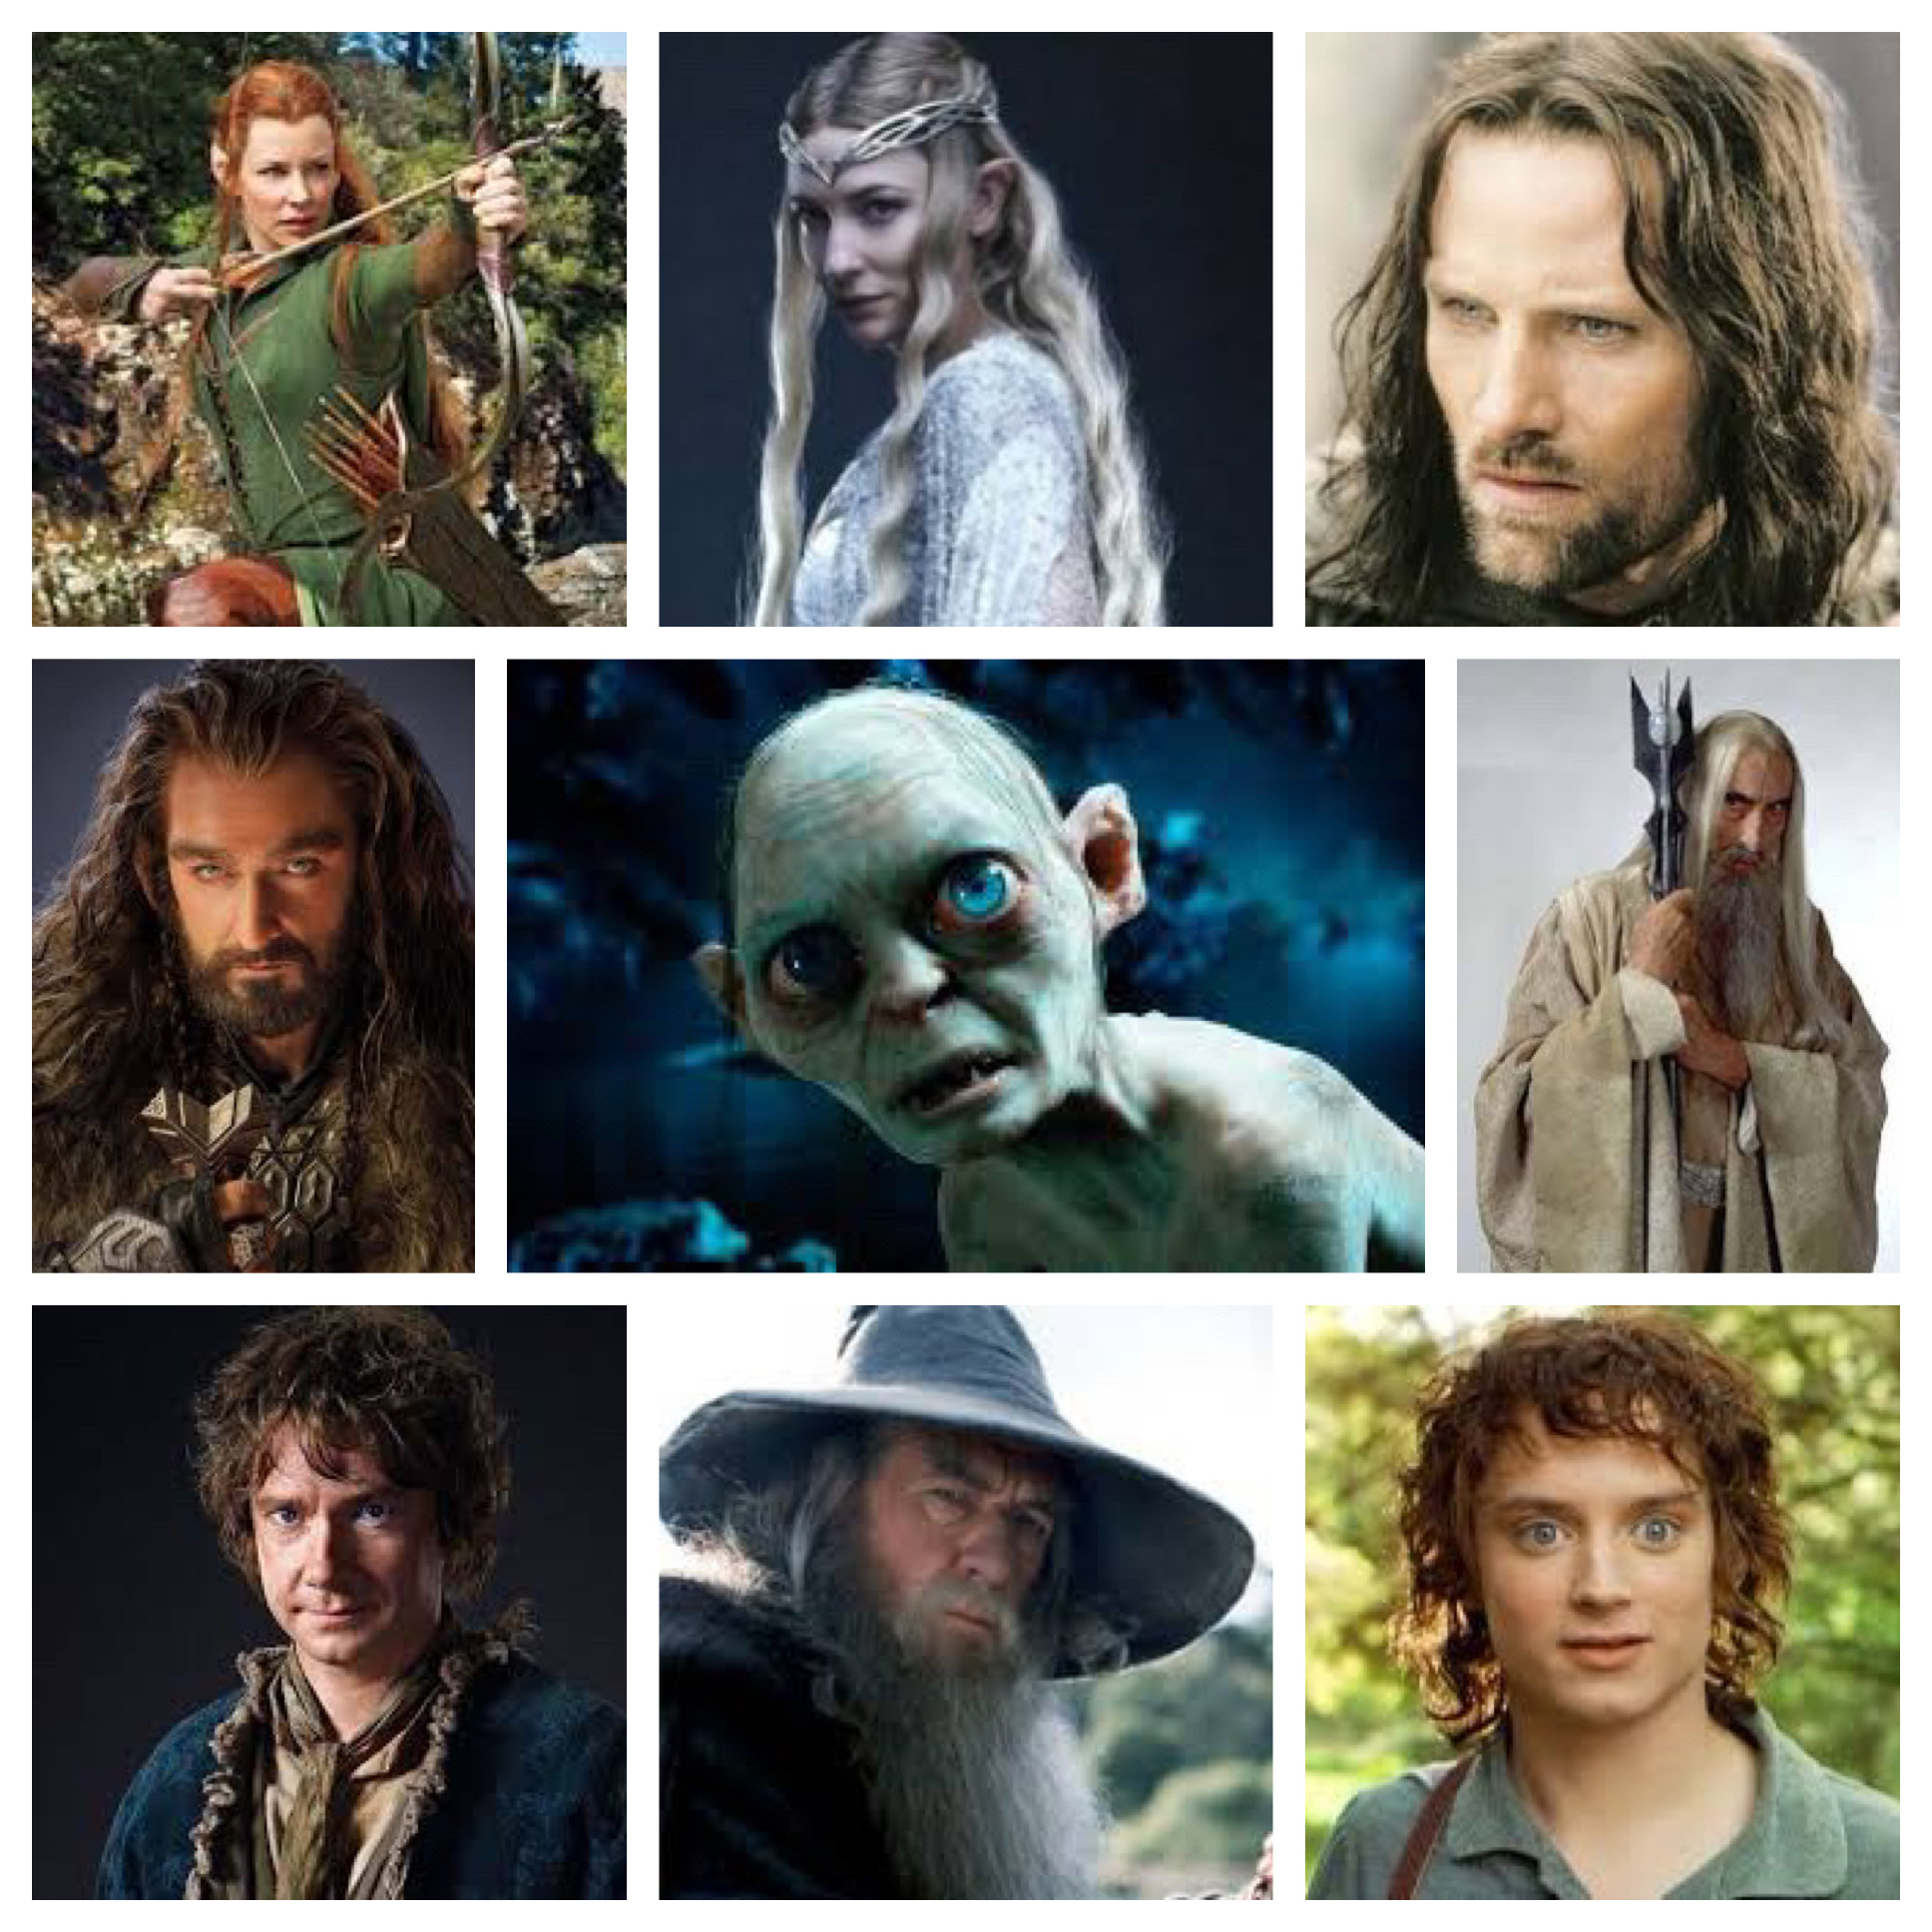 Some of the cast & their names.  Lord of the rings, The hobbit, Lord